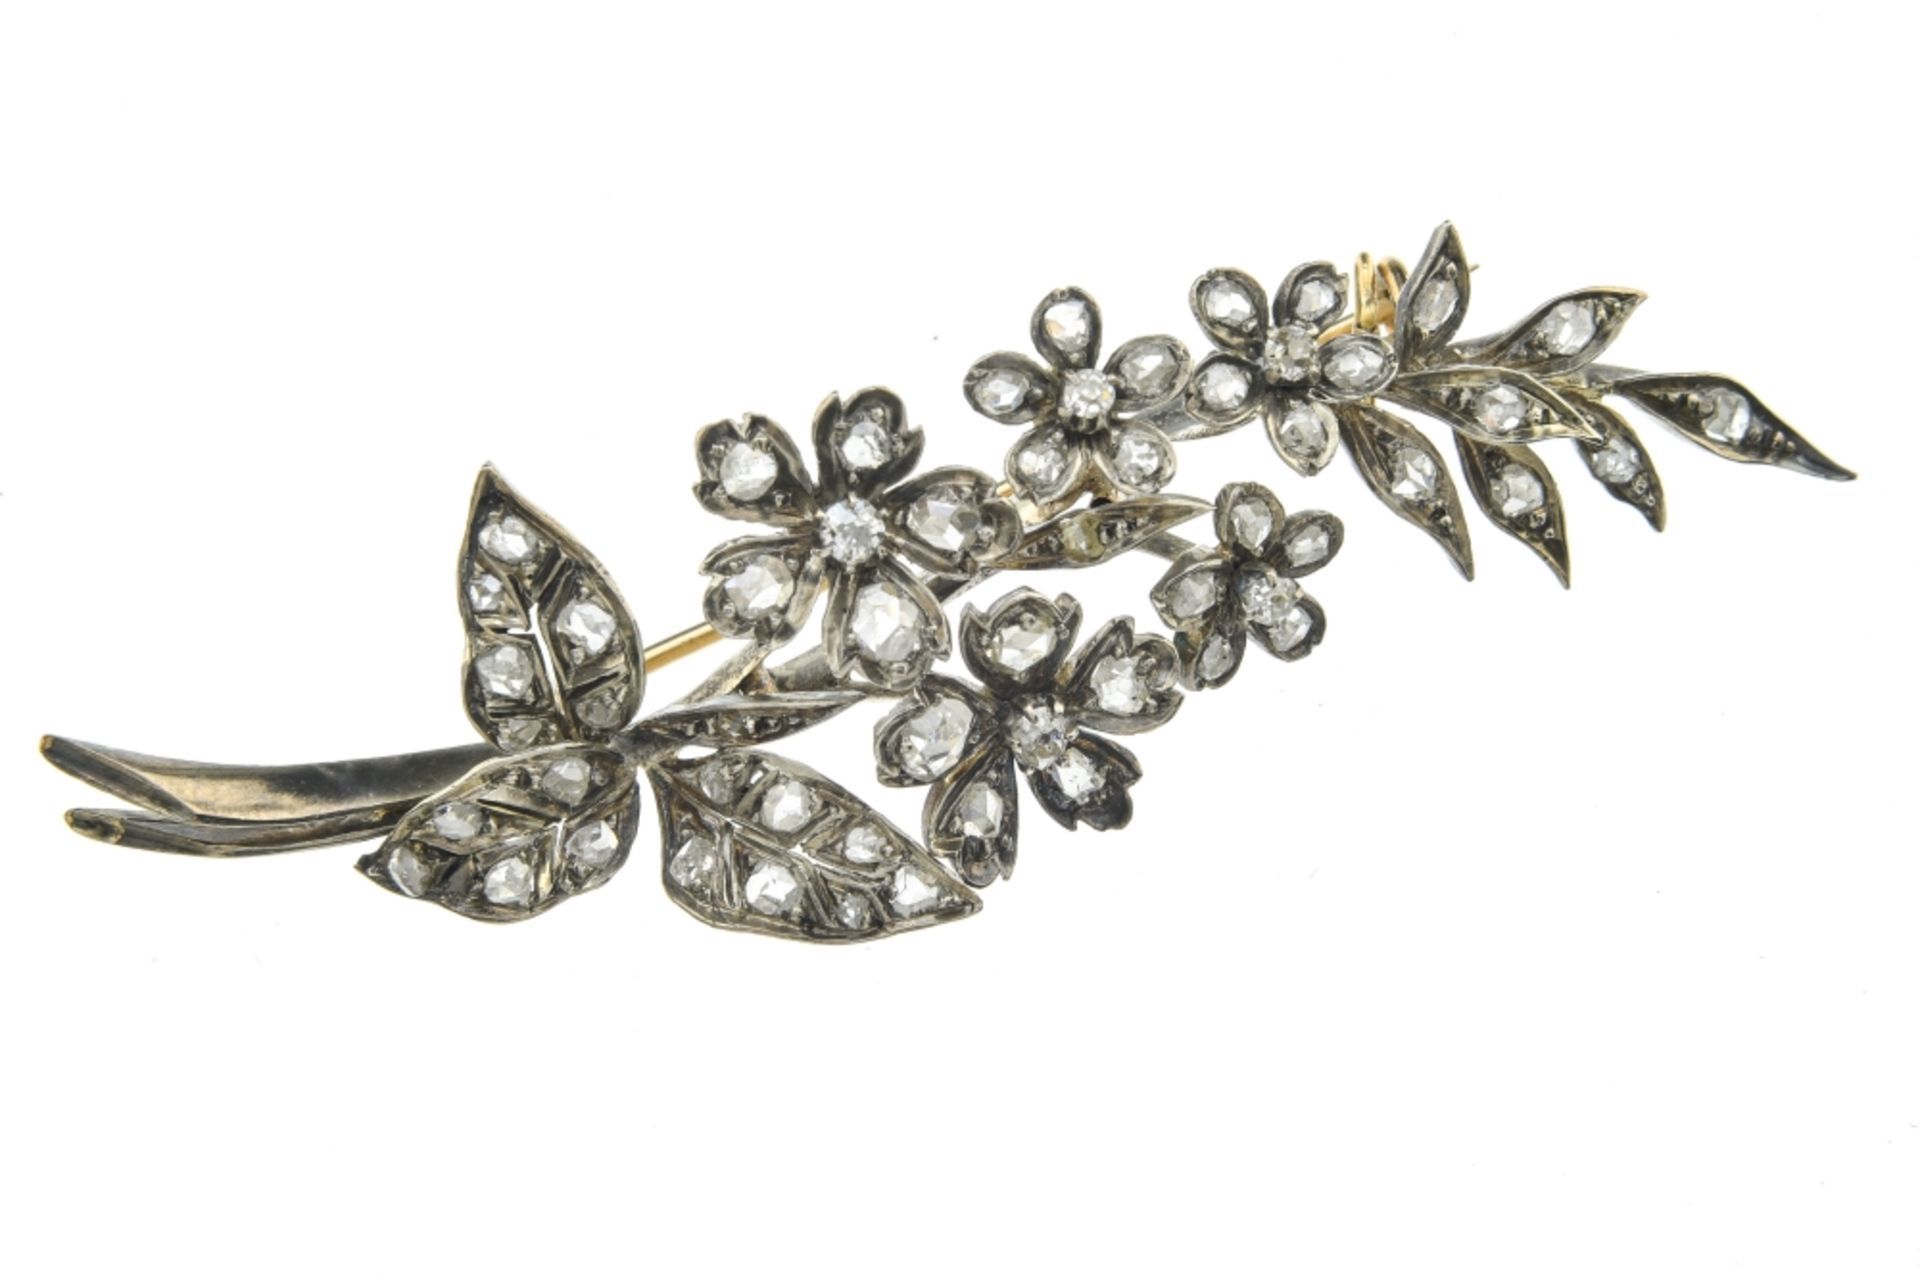 Jewellery set BELLE EPOQUE AND ART DƒCO Includes: A brooch with silver foliage on gold, set with - Image 3 of 7